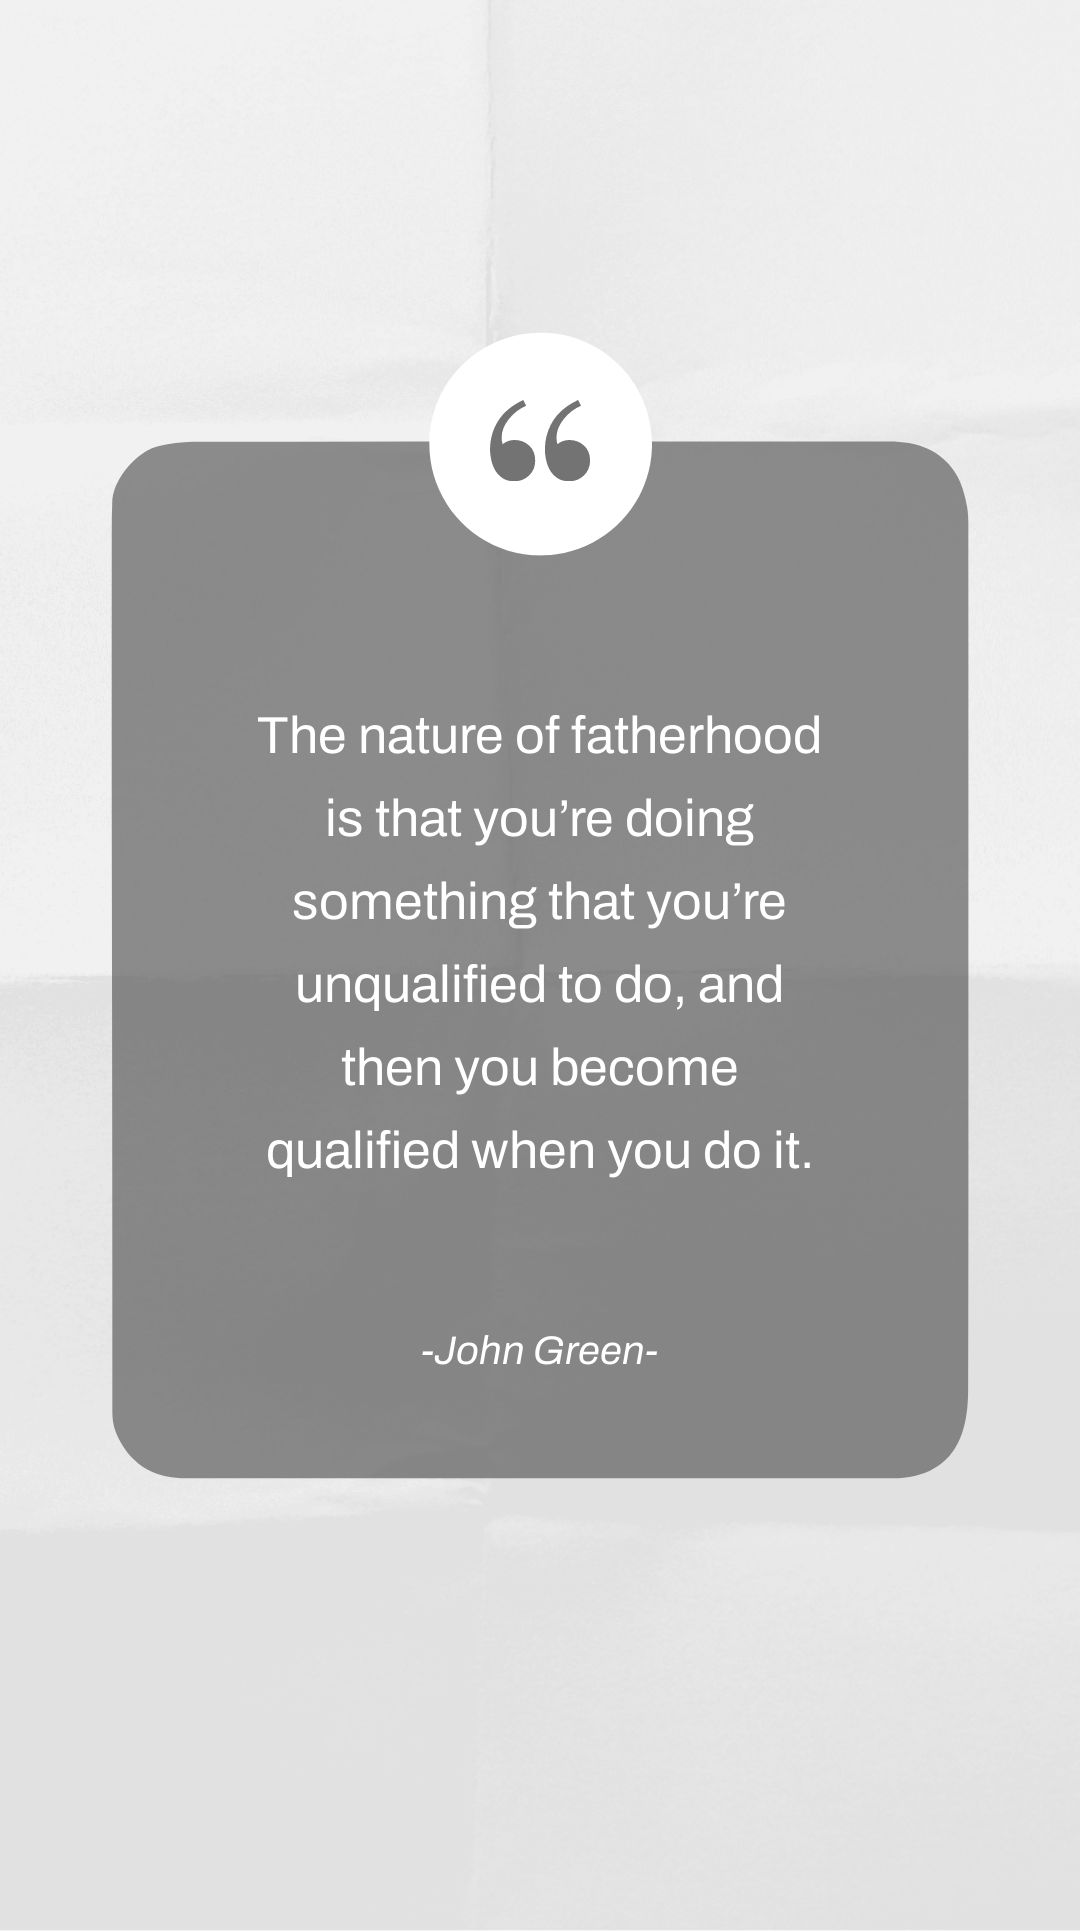 Free John Green - The nature of fatherhood is that you’re doing something that you’re unqualified to do, and then you become qualified when you do it. in JPG